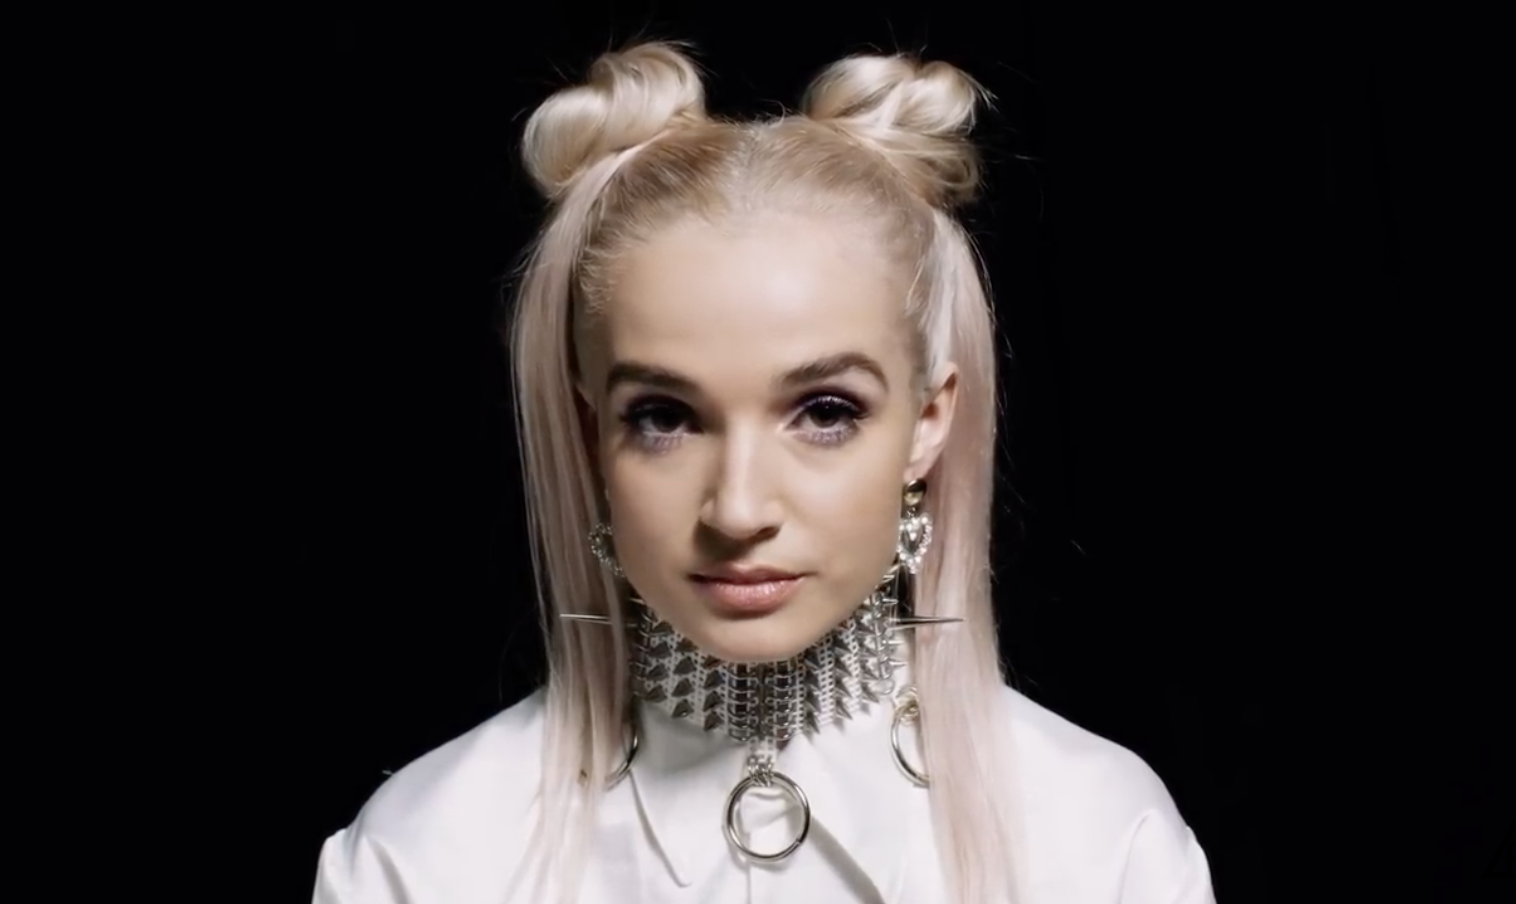 I am NOT in a cult led by Poppy